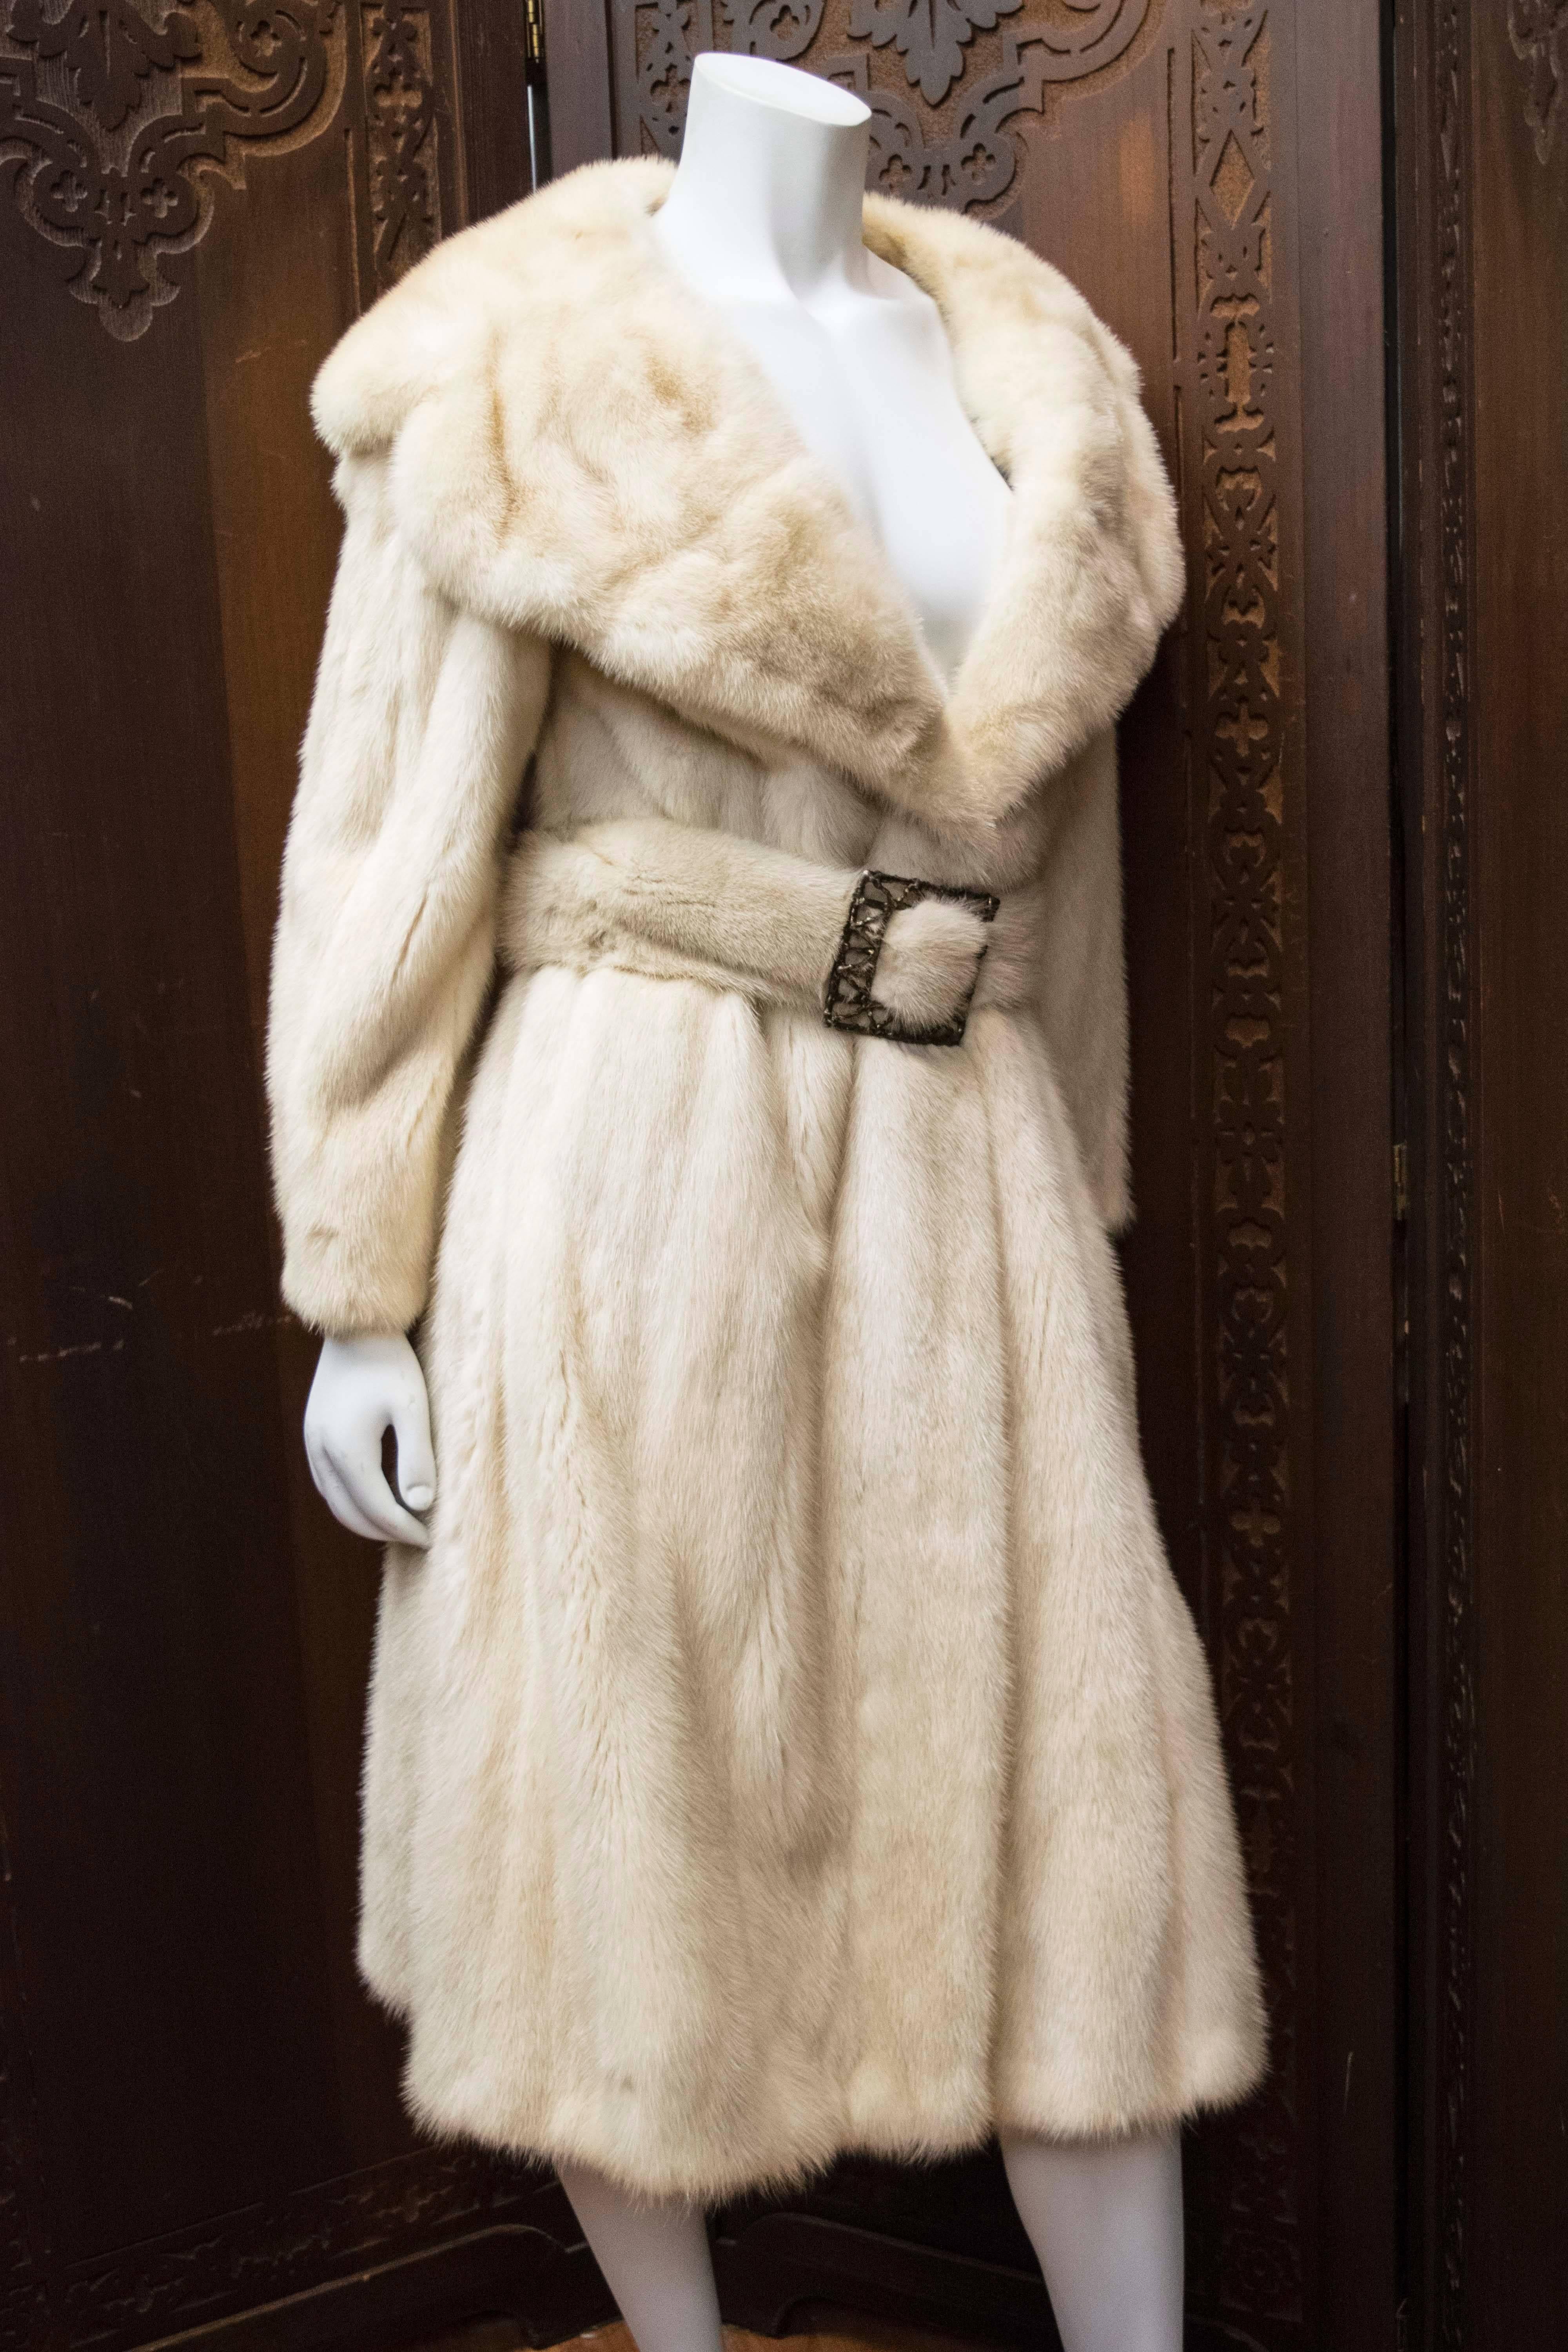 Ivory Mink Fur Coat

Beautiful long mink fur coat with original mink belt with rhinestone detailing. The perfect piece for any lover of fur. 

B 36
W 36
H 40
L 48